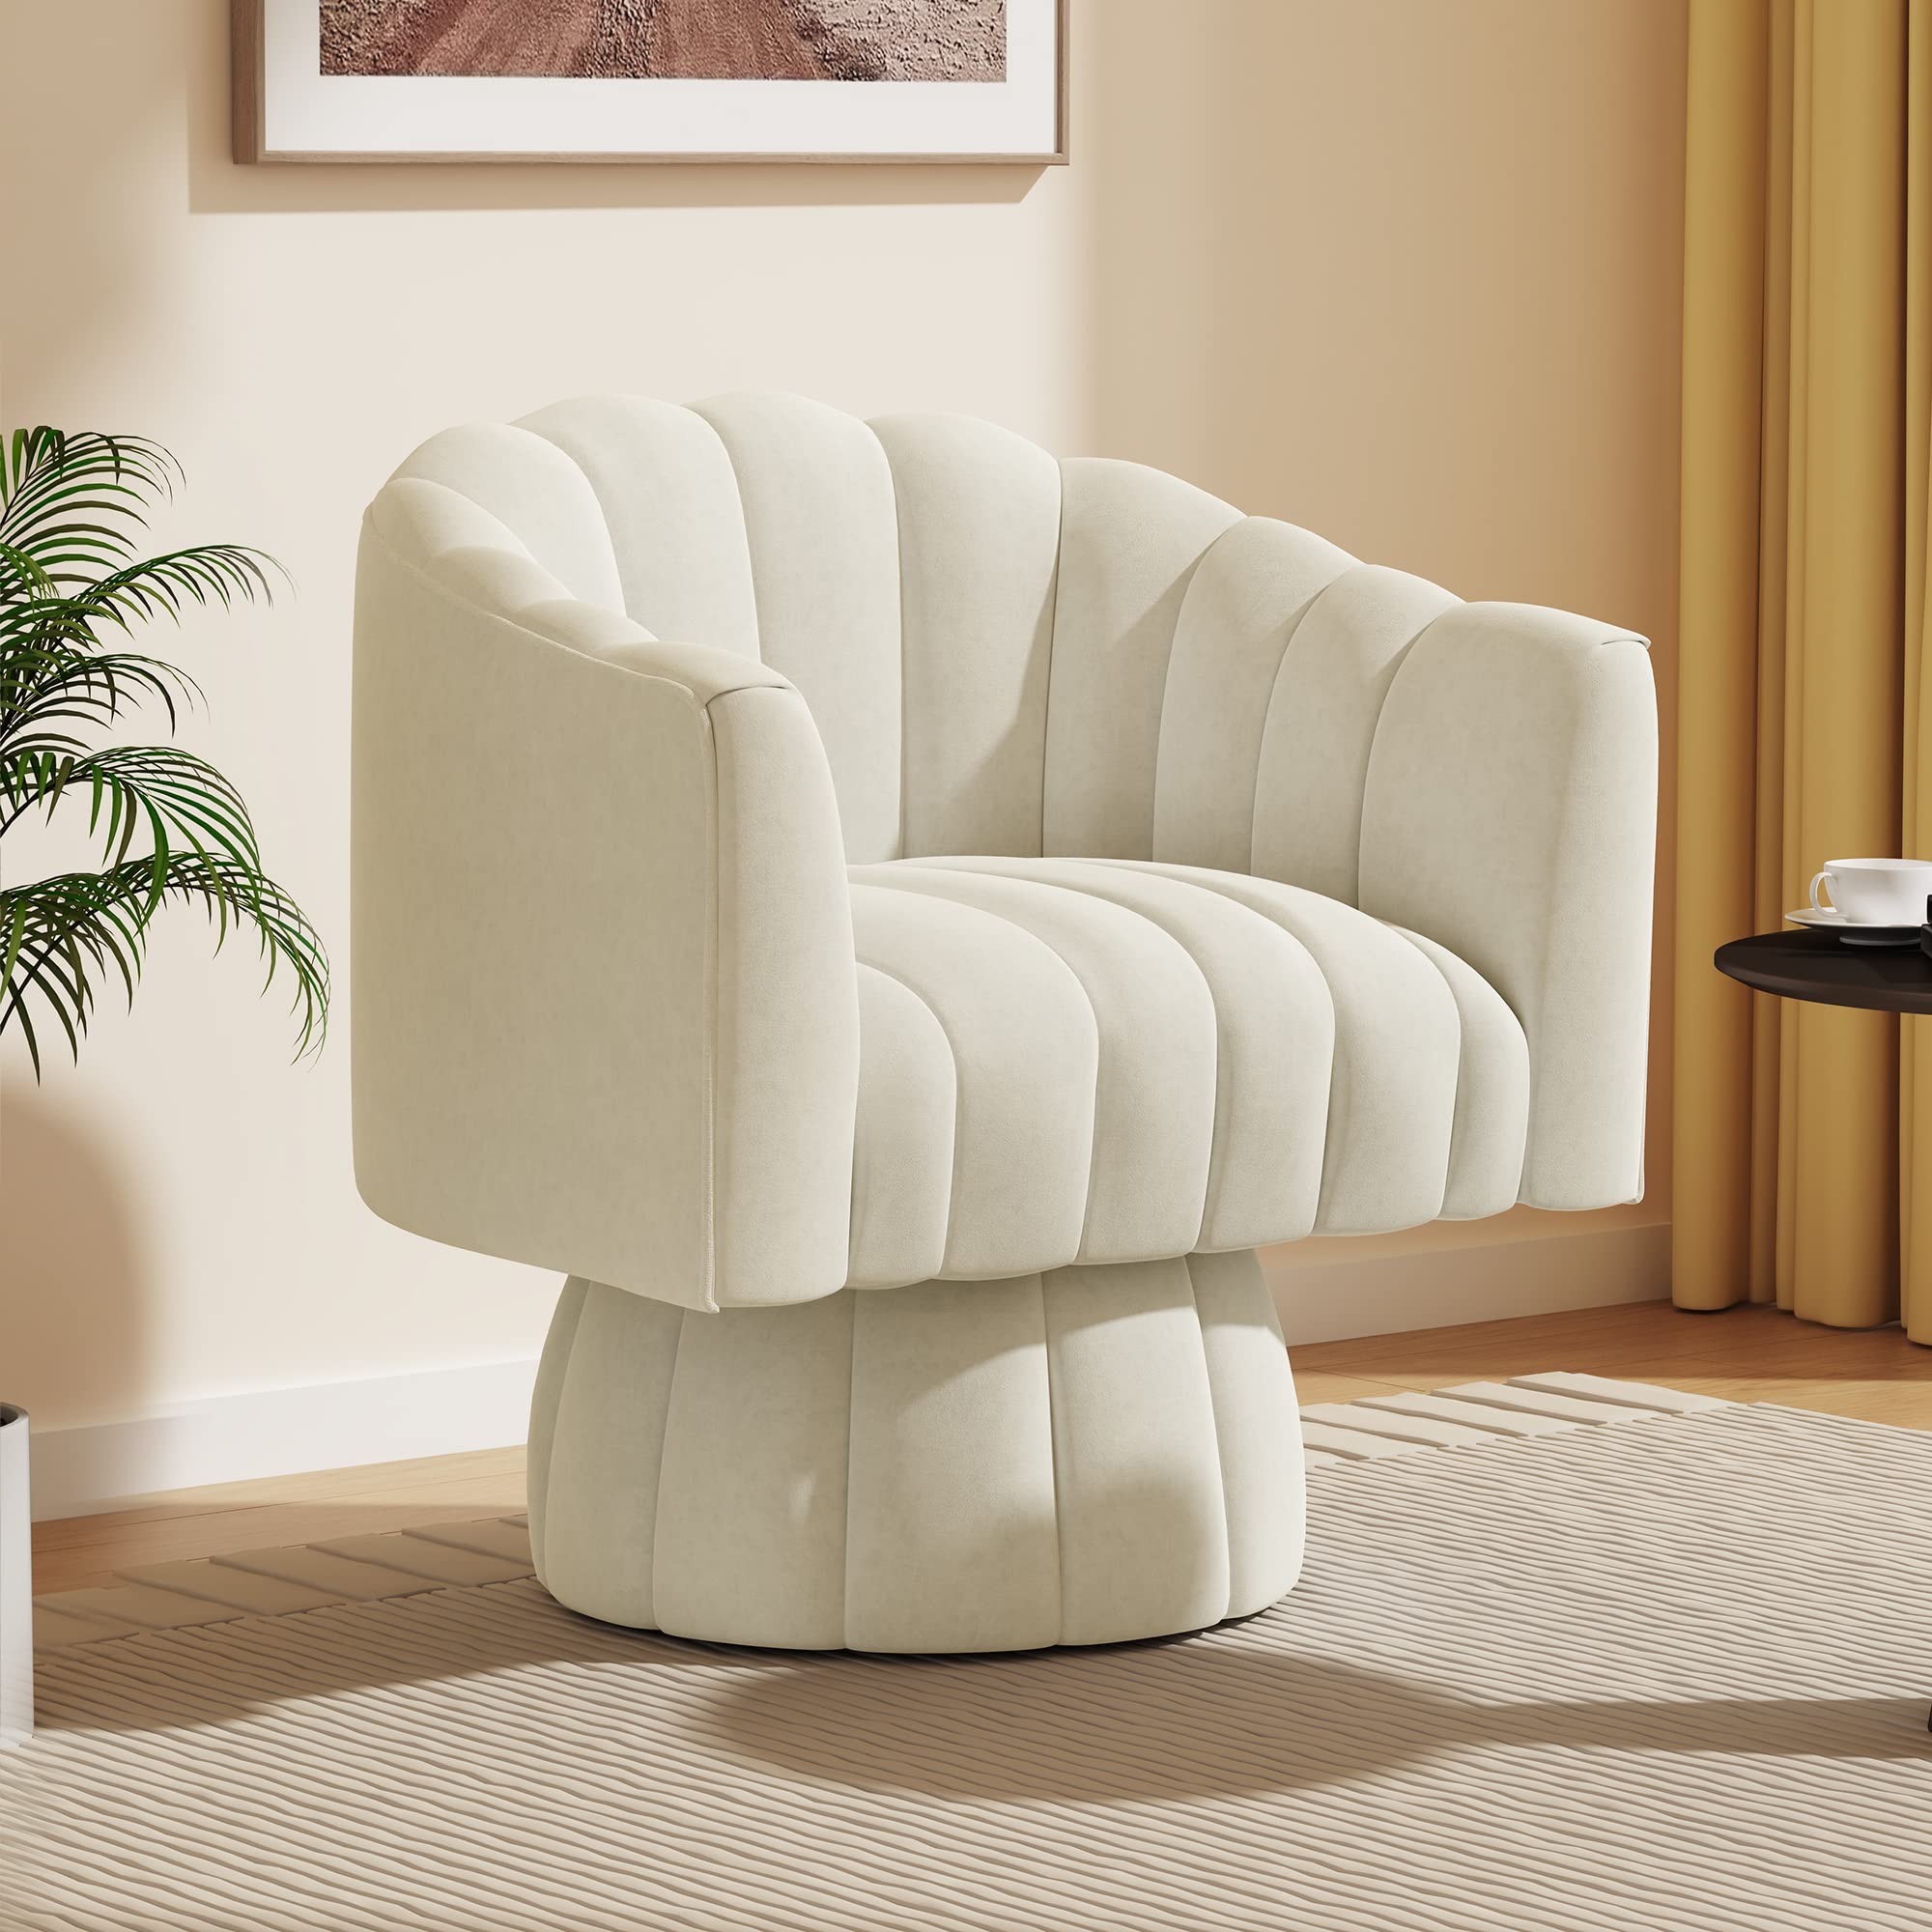 360° Swivel Accent Chairs-11 colors